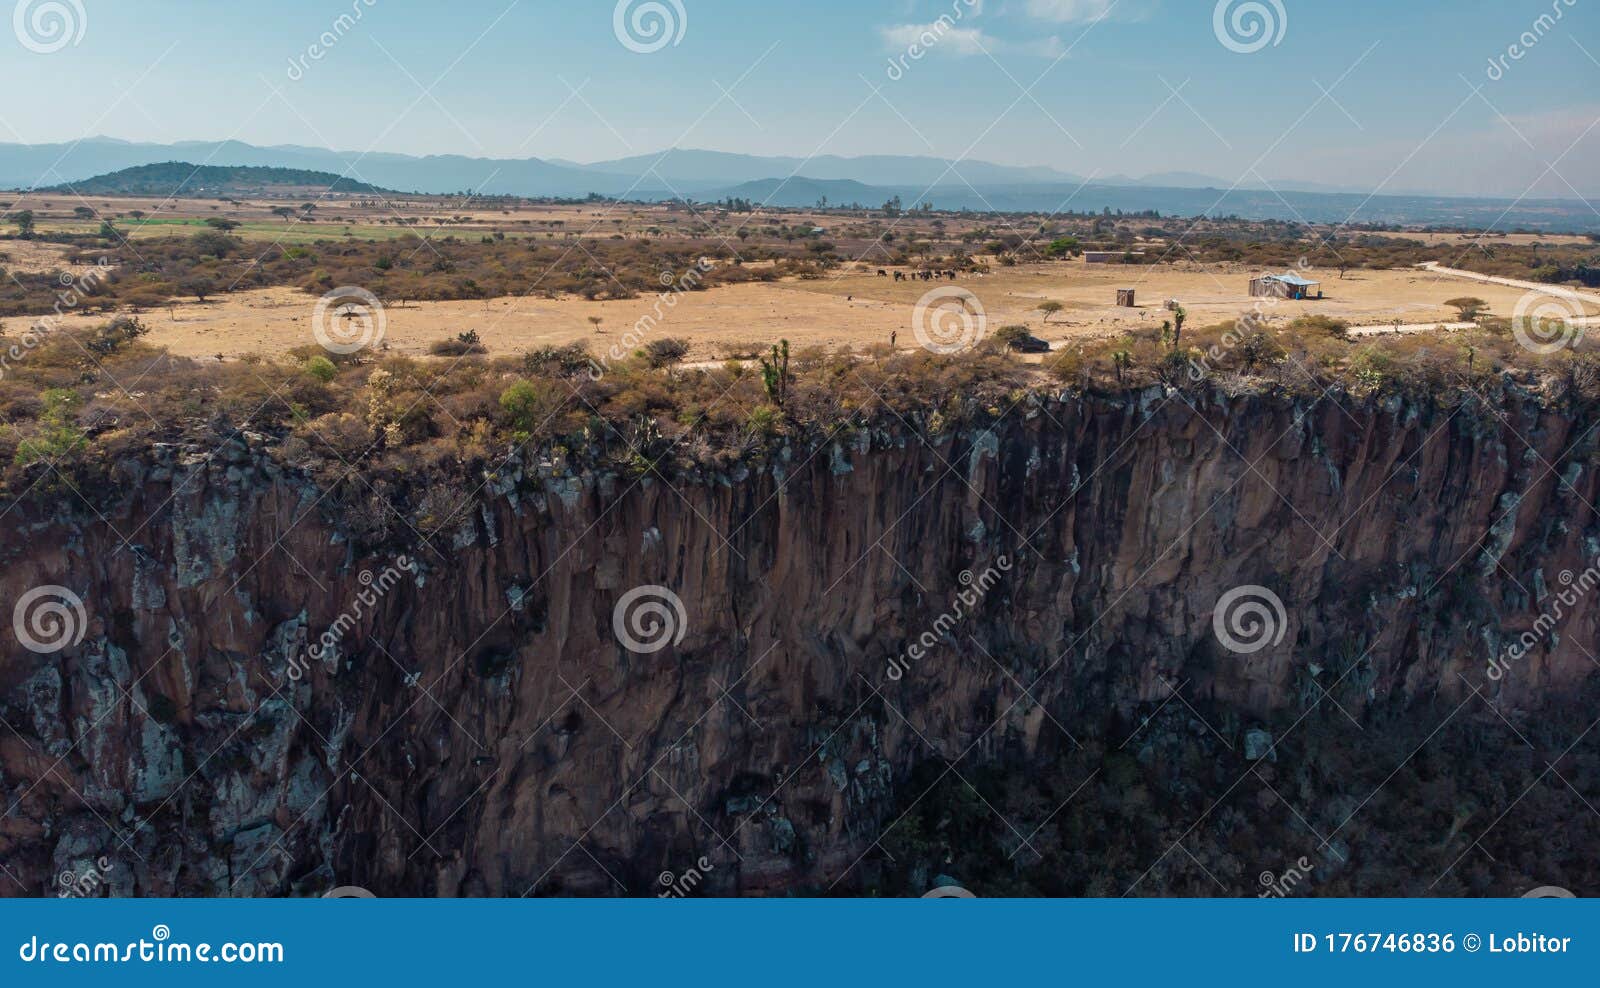 aerial shot of cliff and mountains in background in peÃÂ±a al aire libre state of hidalgo